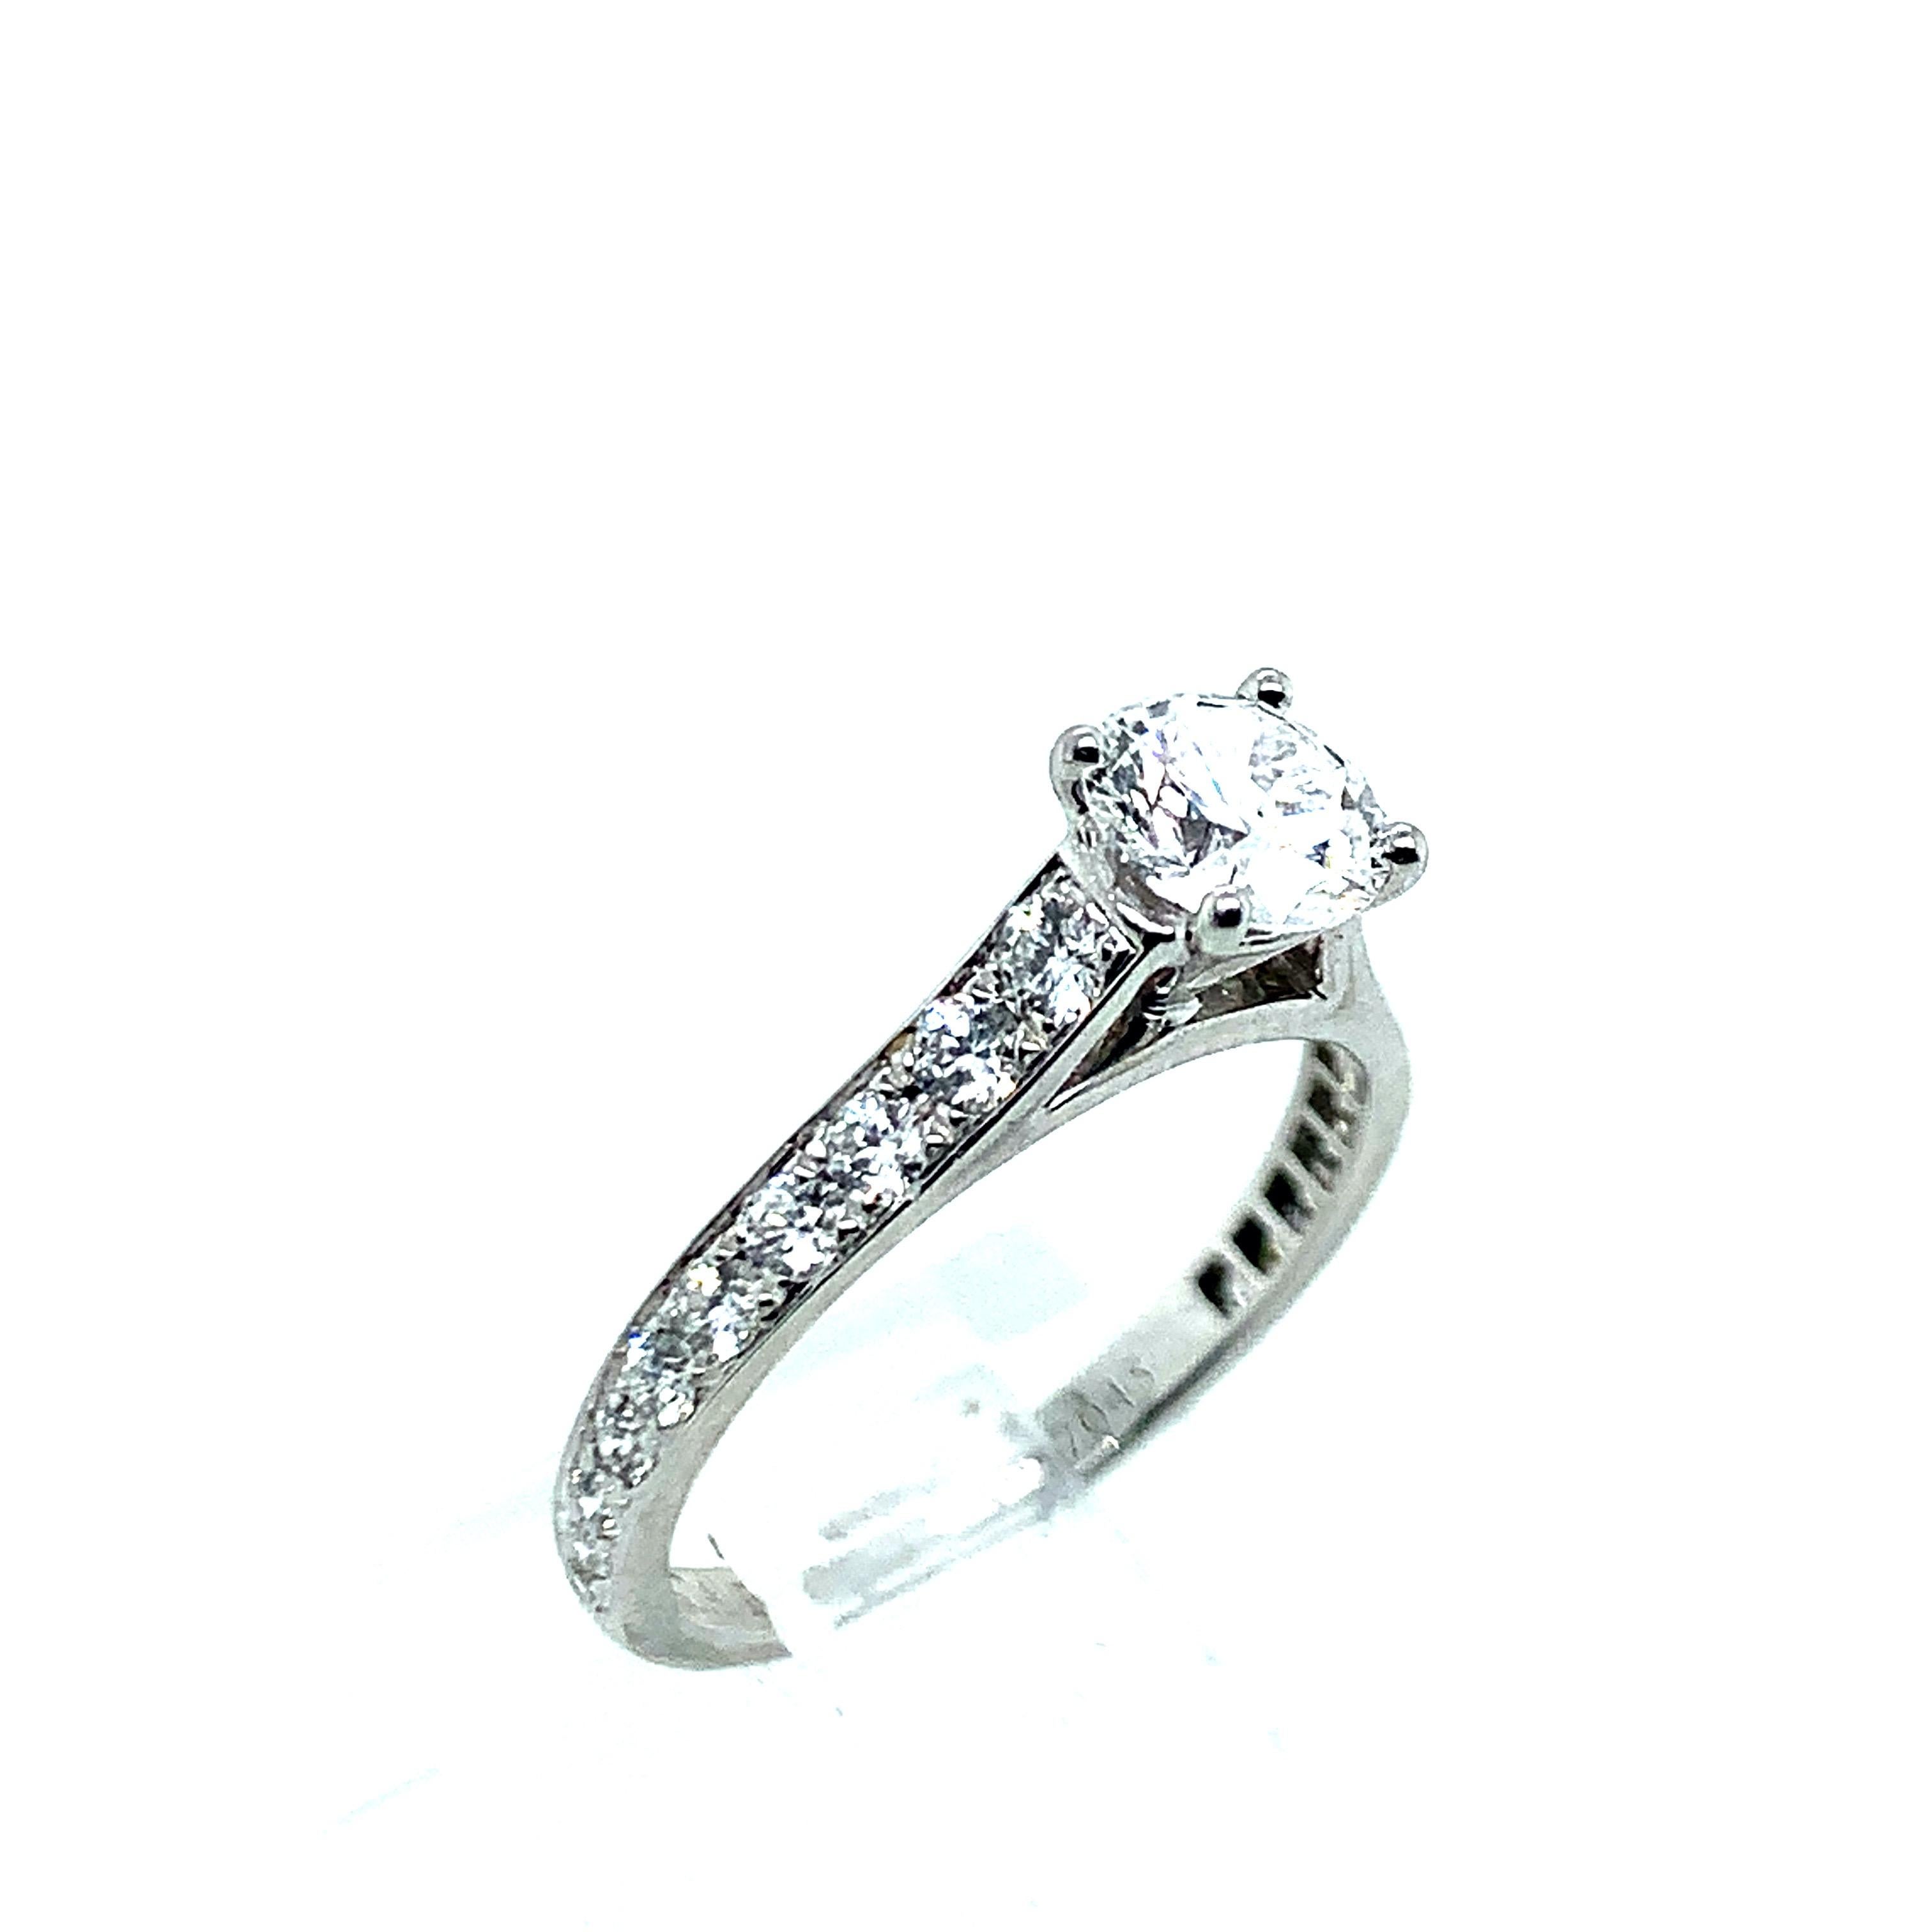 Created by Van Cleef & Arpels, this 0.43 carat diamond solitaire ring is set in platinum. It weighs 2.1 grams. Size 3. It comes with certificate of authenticity and proof of purchase. The diamond's color is D and has a clarity of Internally